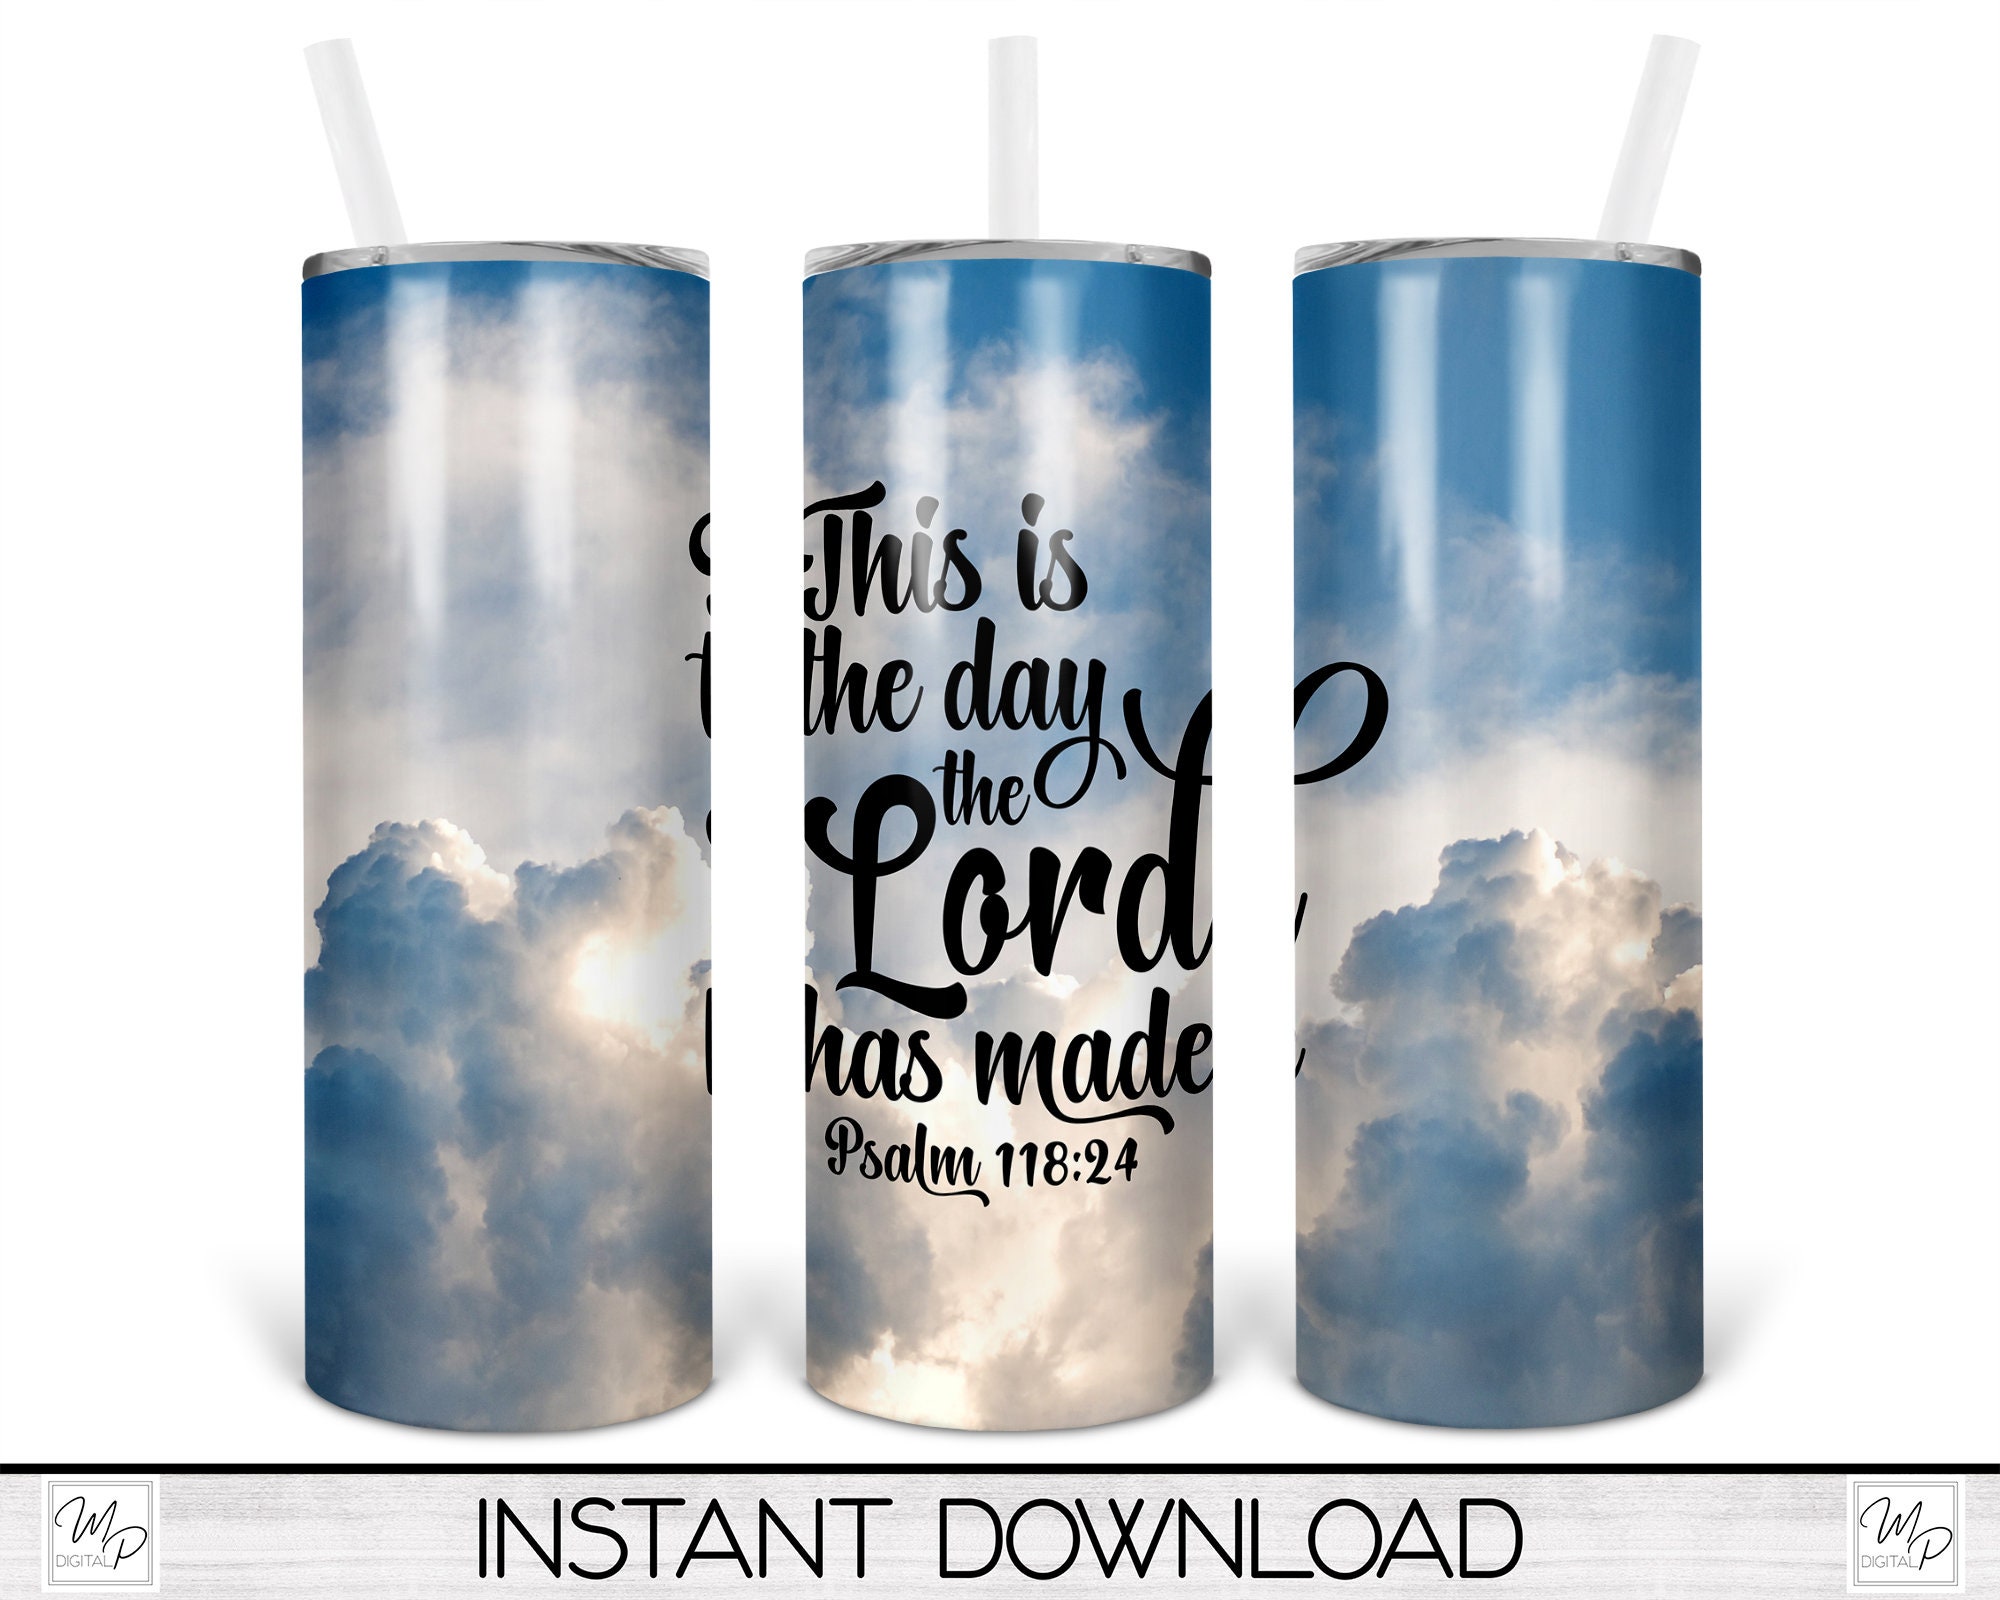 Sublimation Bible Verse Bookmarks – Beautiful Creations - Crafts by Petra